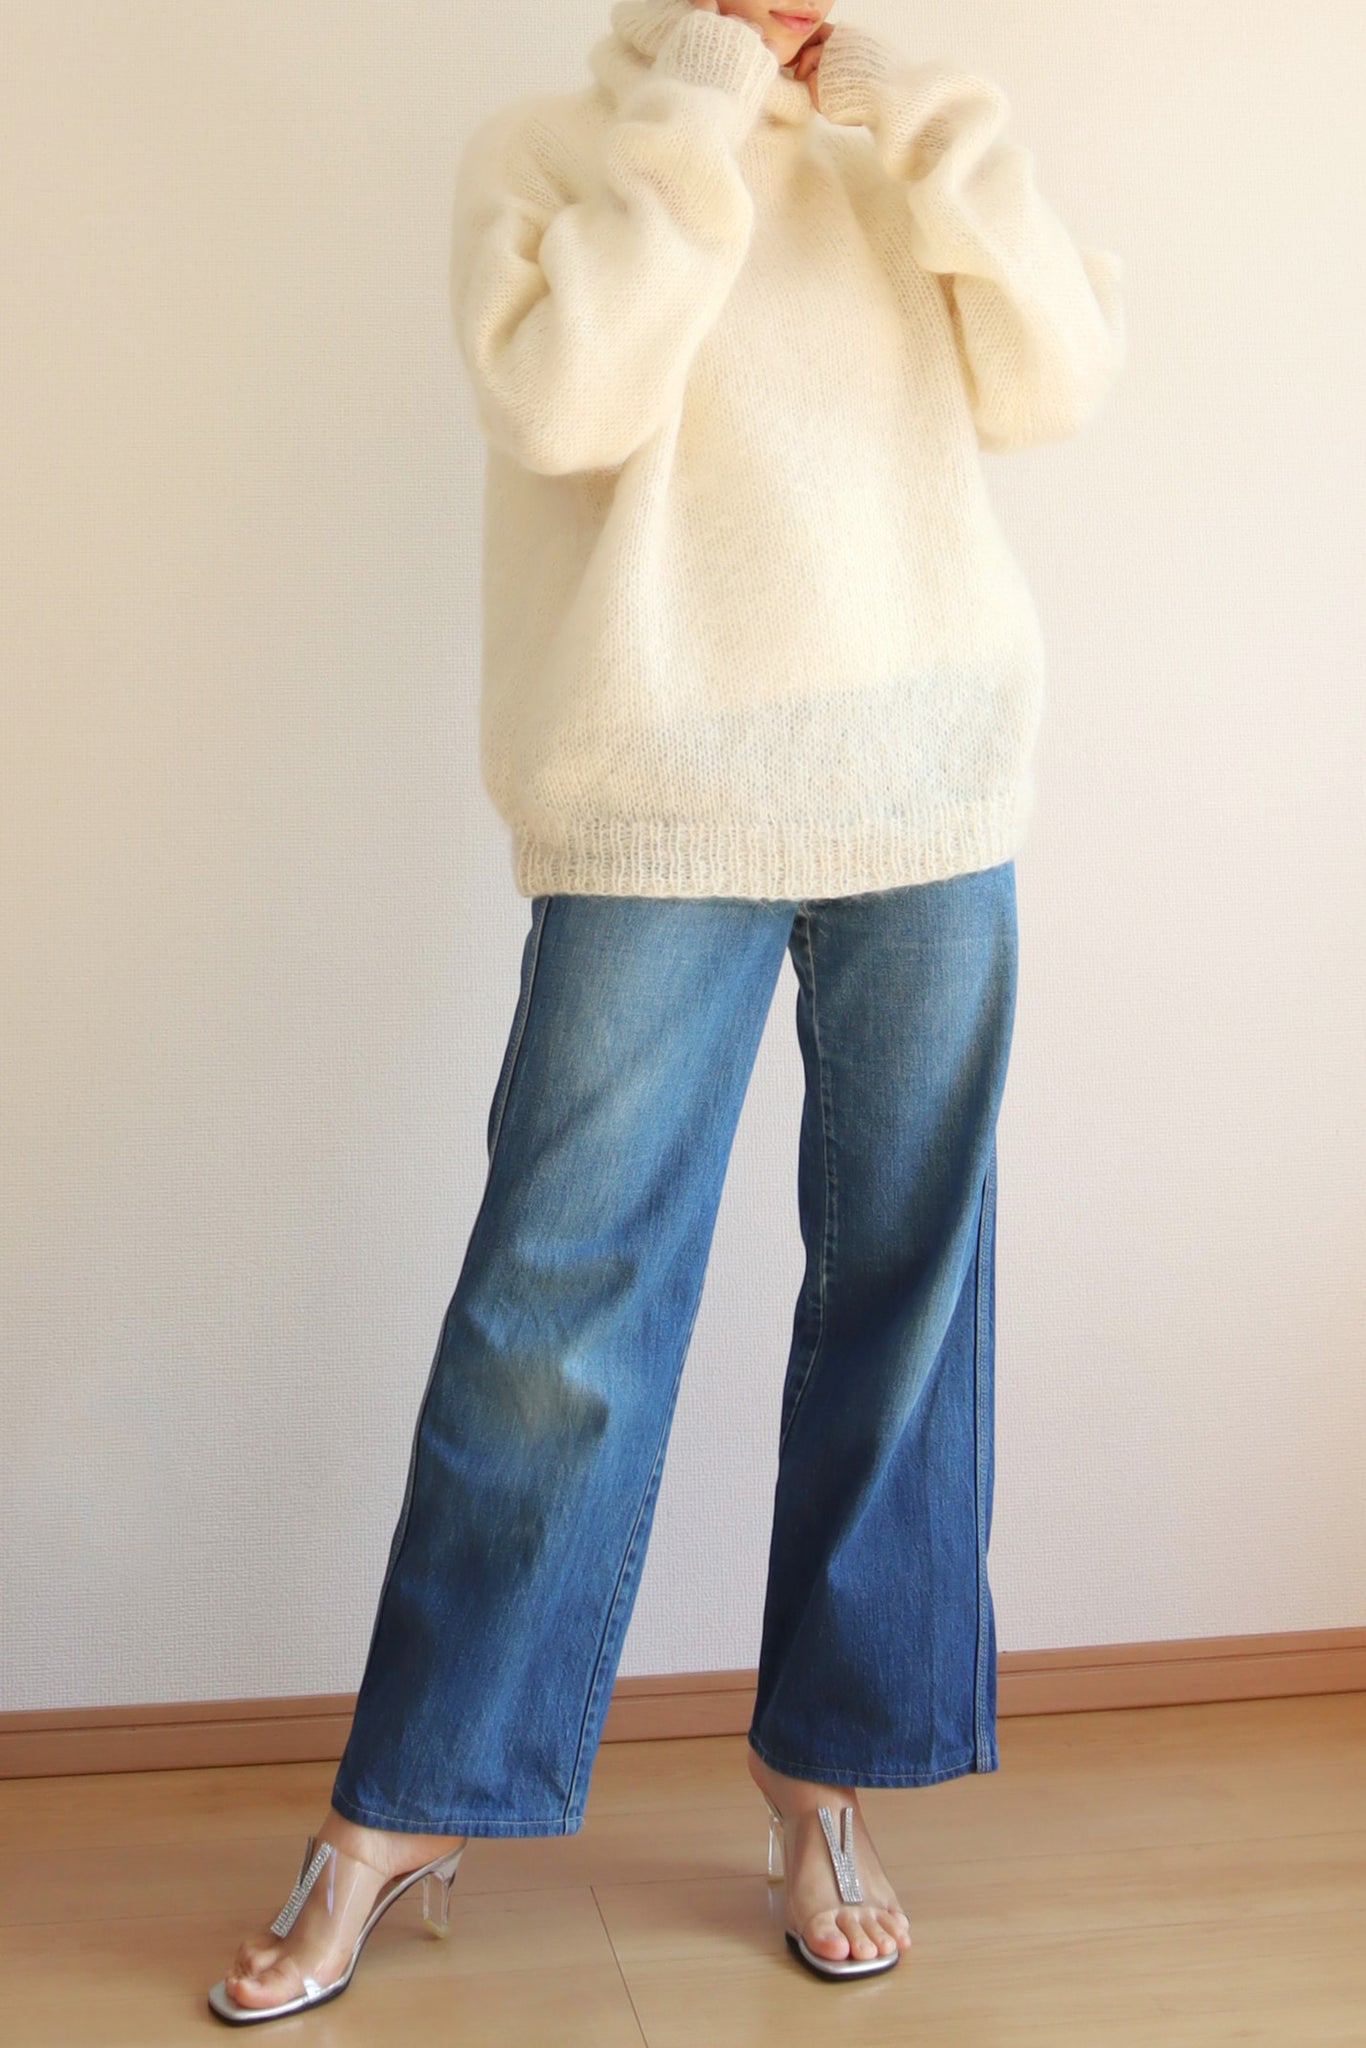 80s Hand Knit White Mohair Sweater Size XL